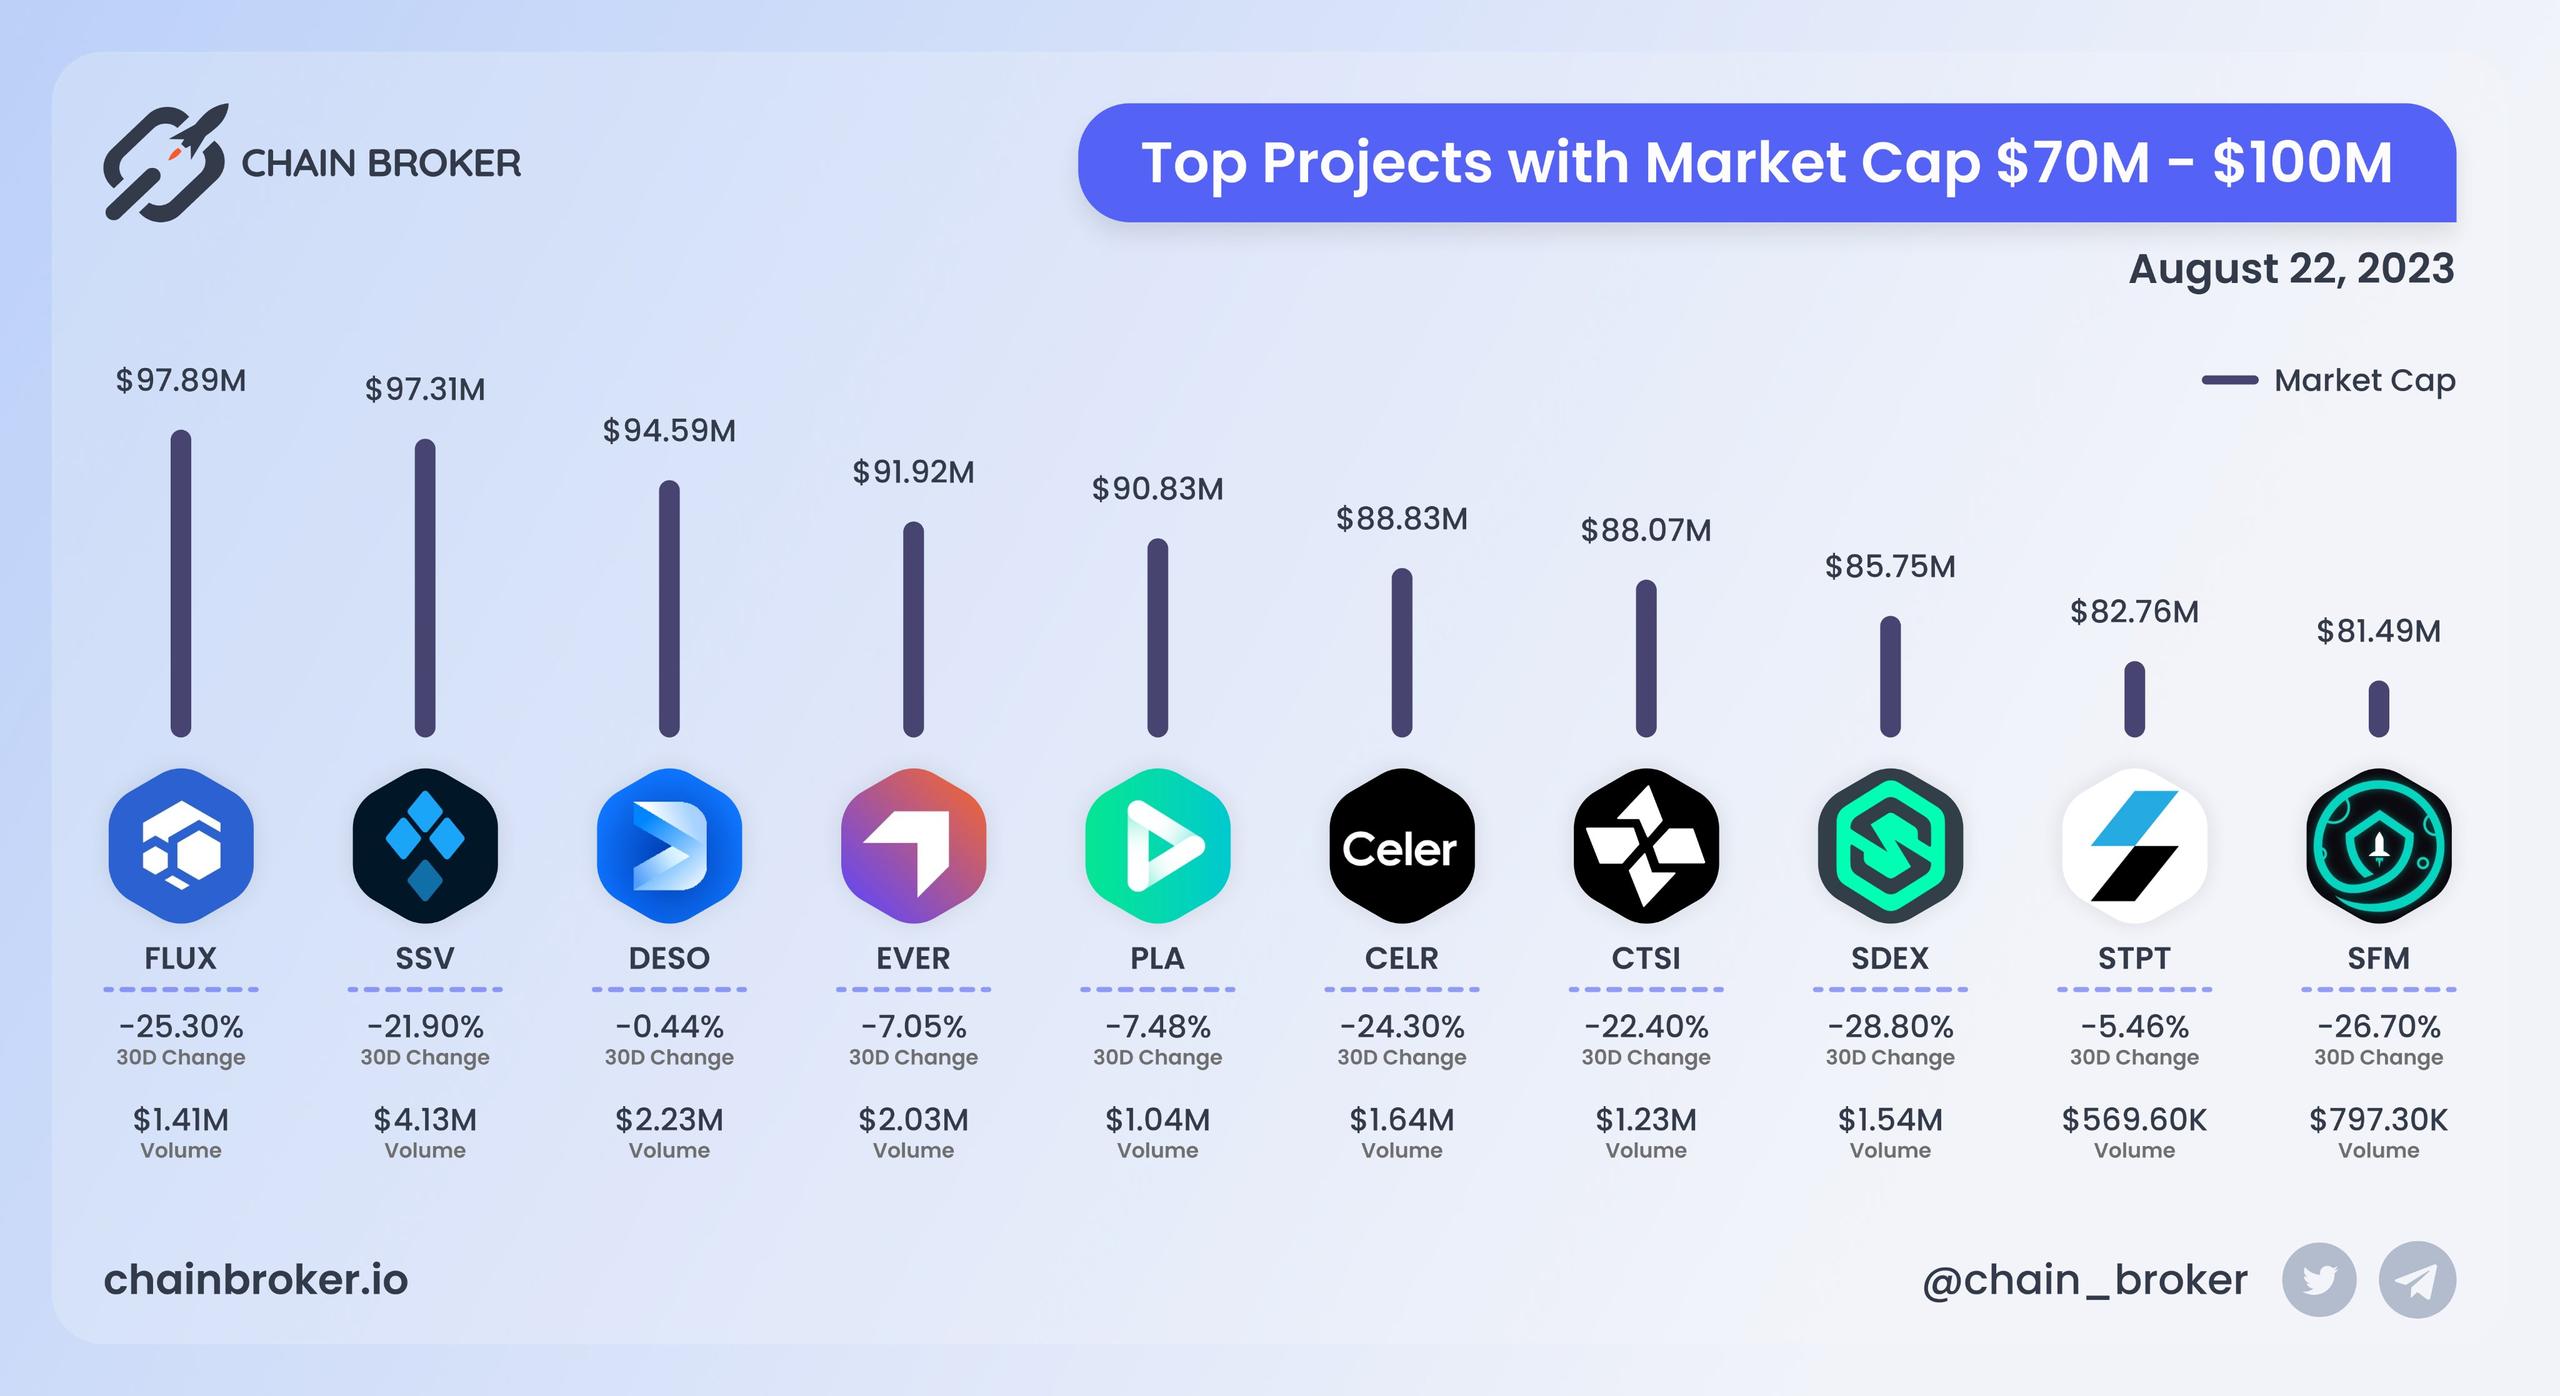 Top projects with Market Cap $70M - $100M